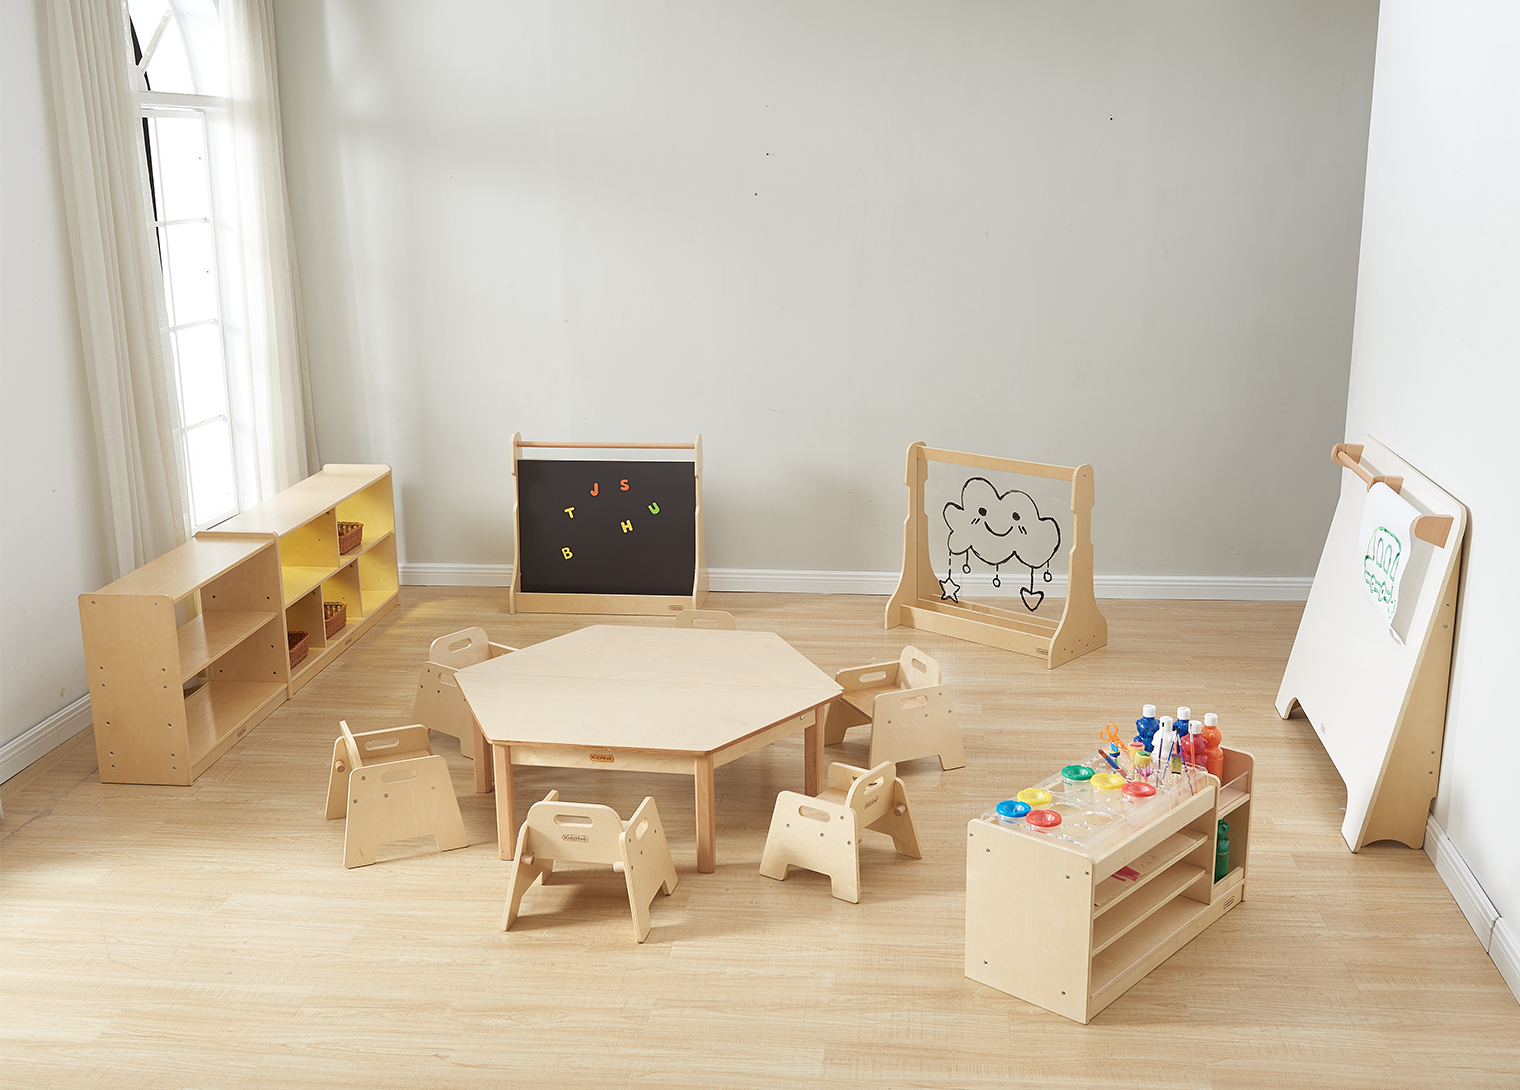 Art Activity and Makerspace Roomscapes Sets A